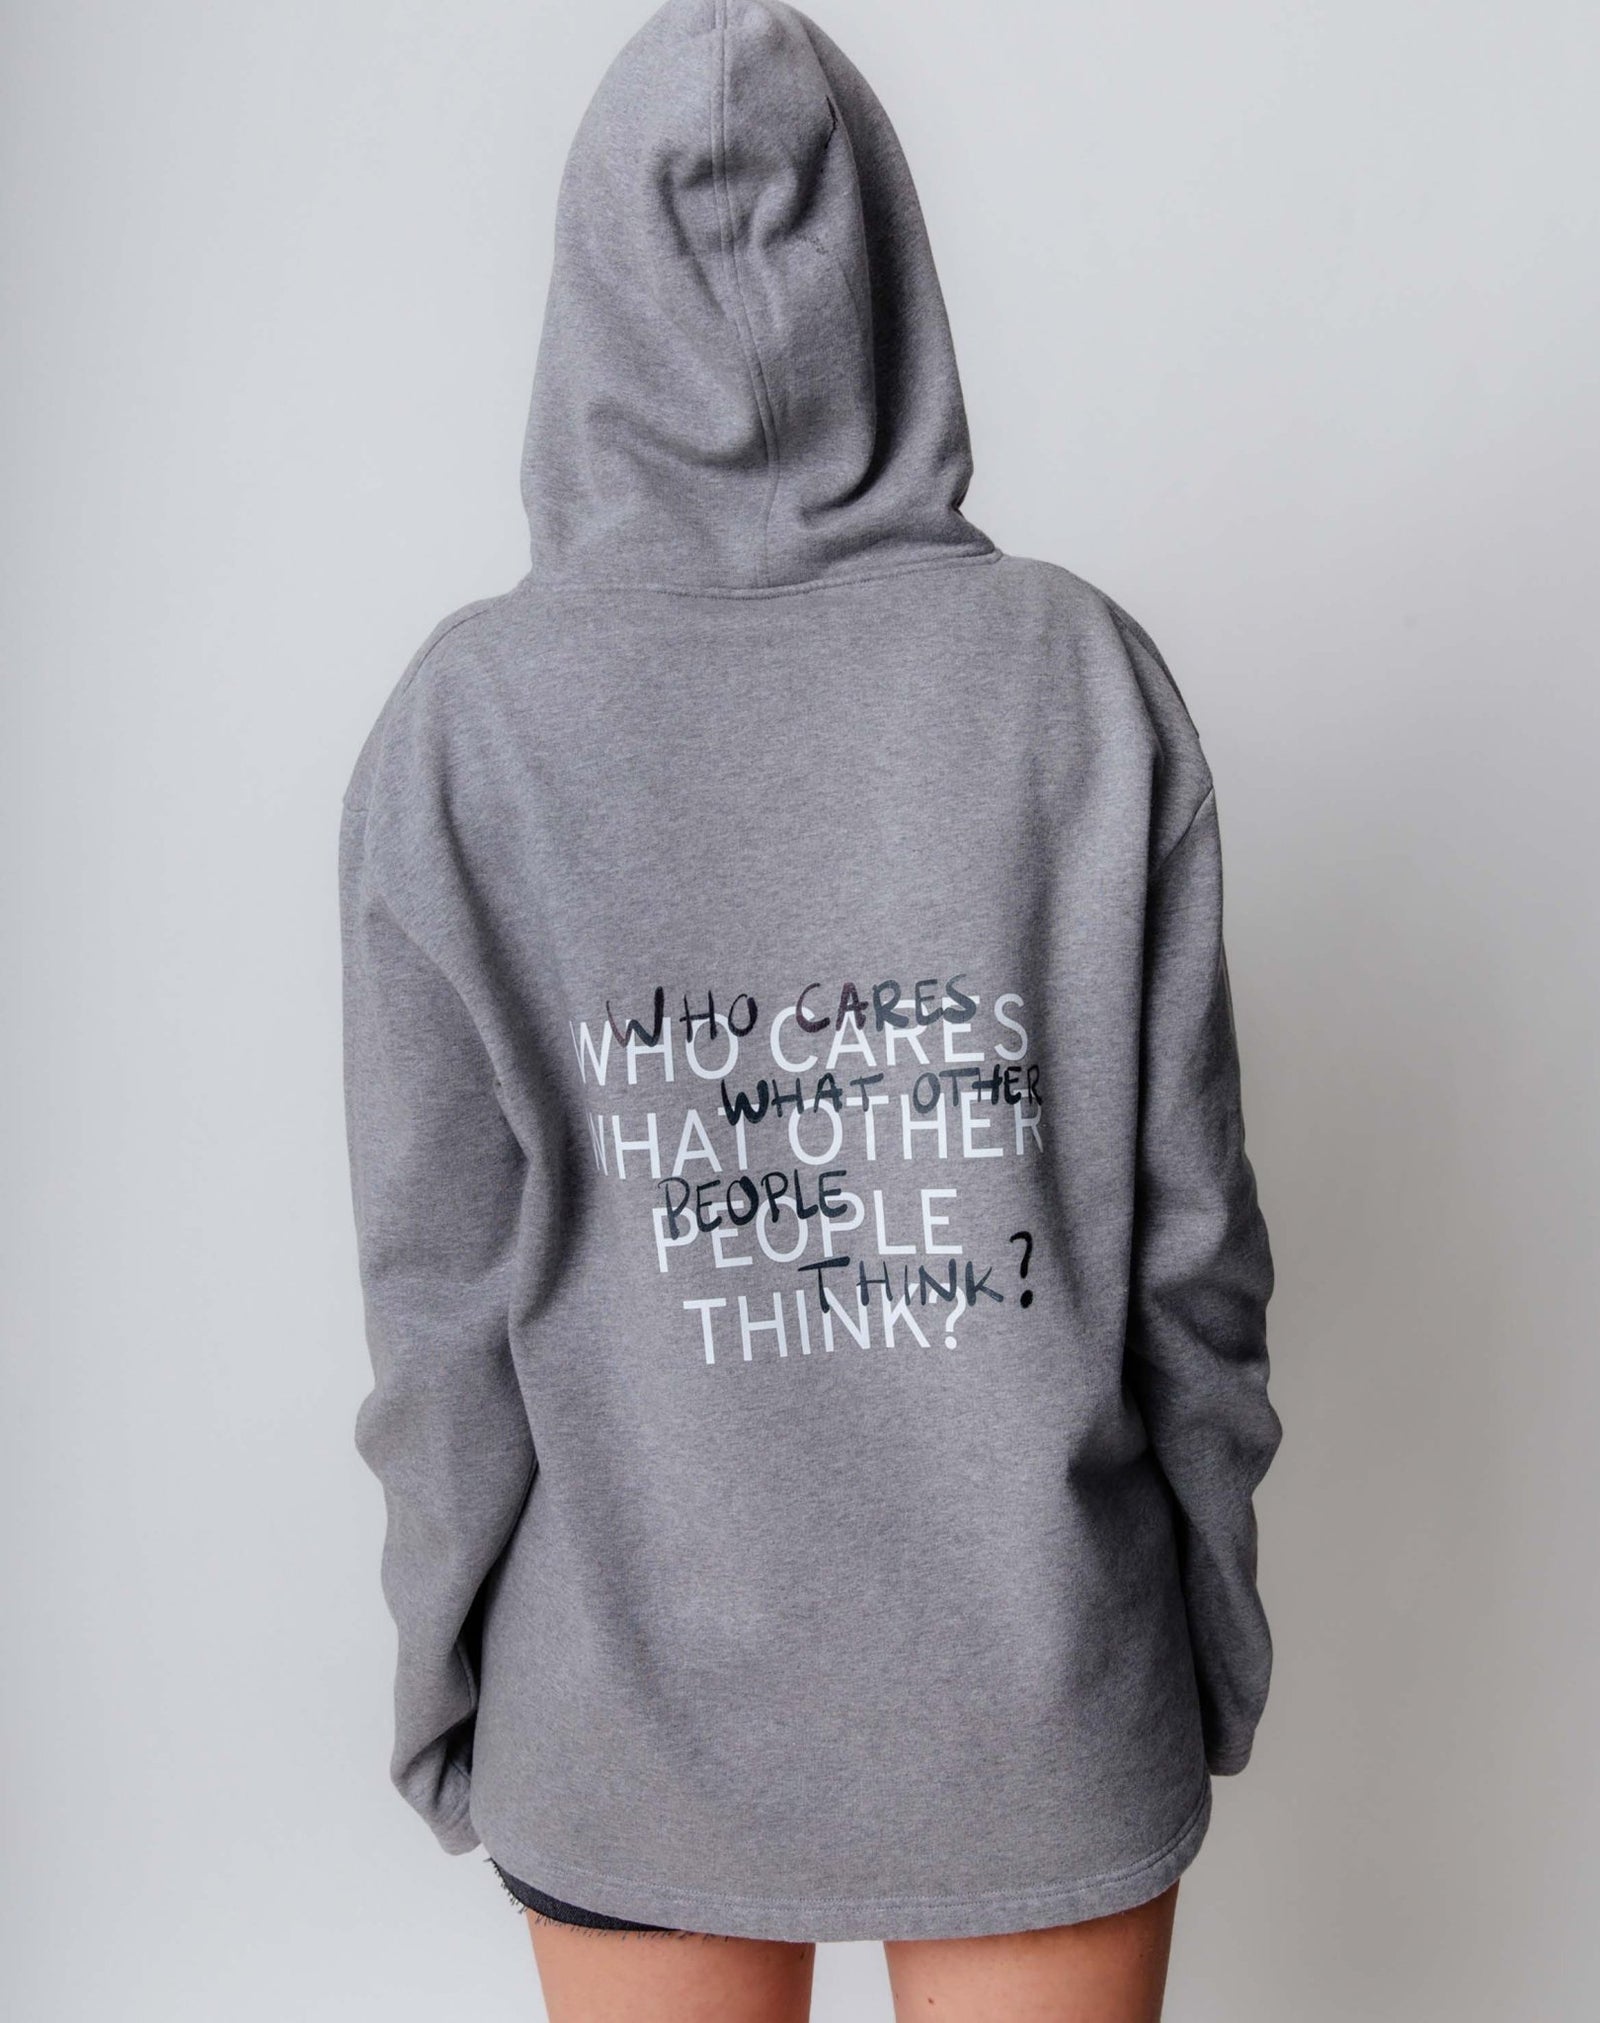 WHO CARES? Hoodie - OBLIVIOUS?